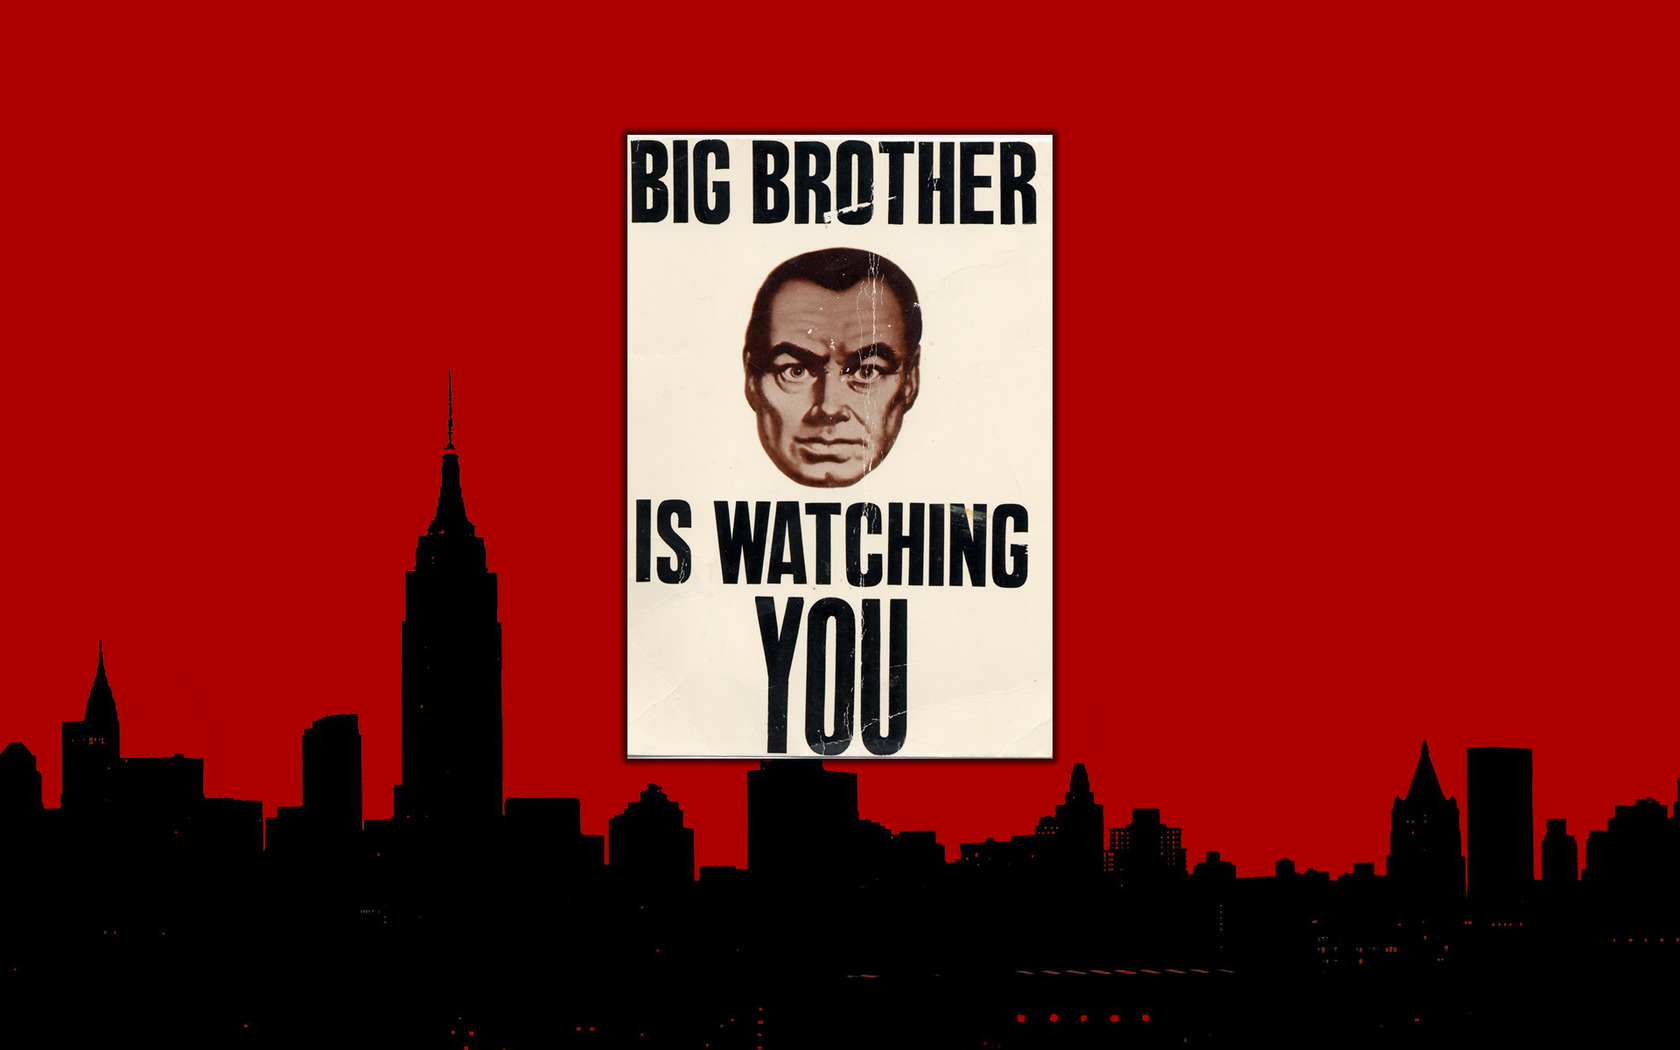 Big Brother Is Watching You. – The worlds biggest fridge magnet